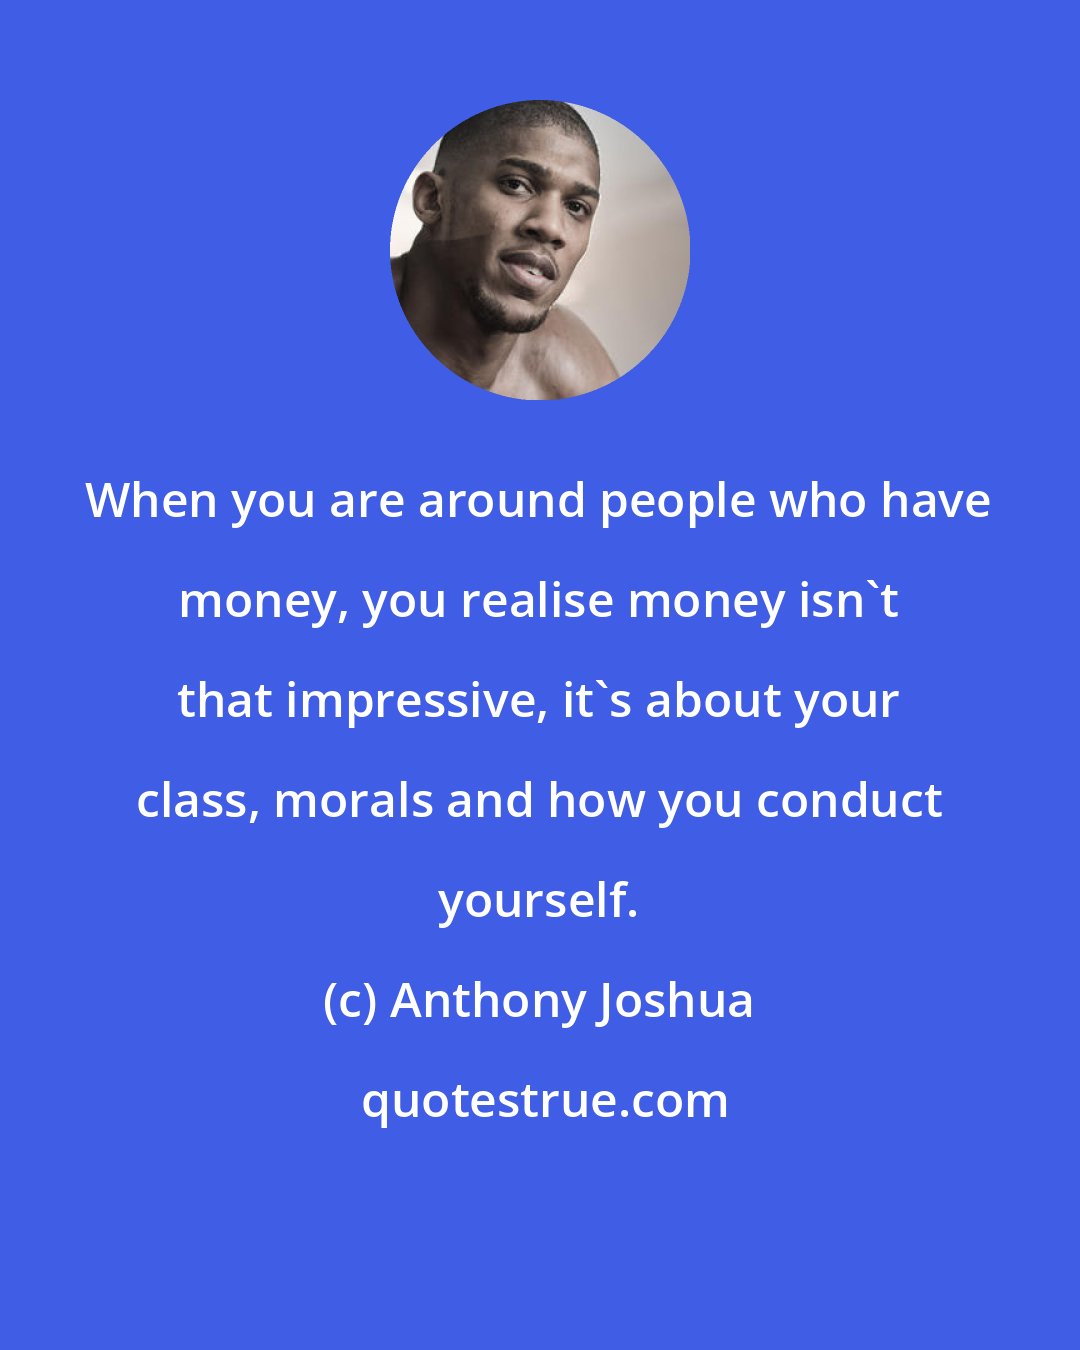 Anthony Joshua: When you are around people who have money, you realise money isn't that impressive, it's about your class, morals and how you conduct yourself.